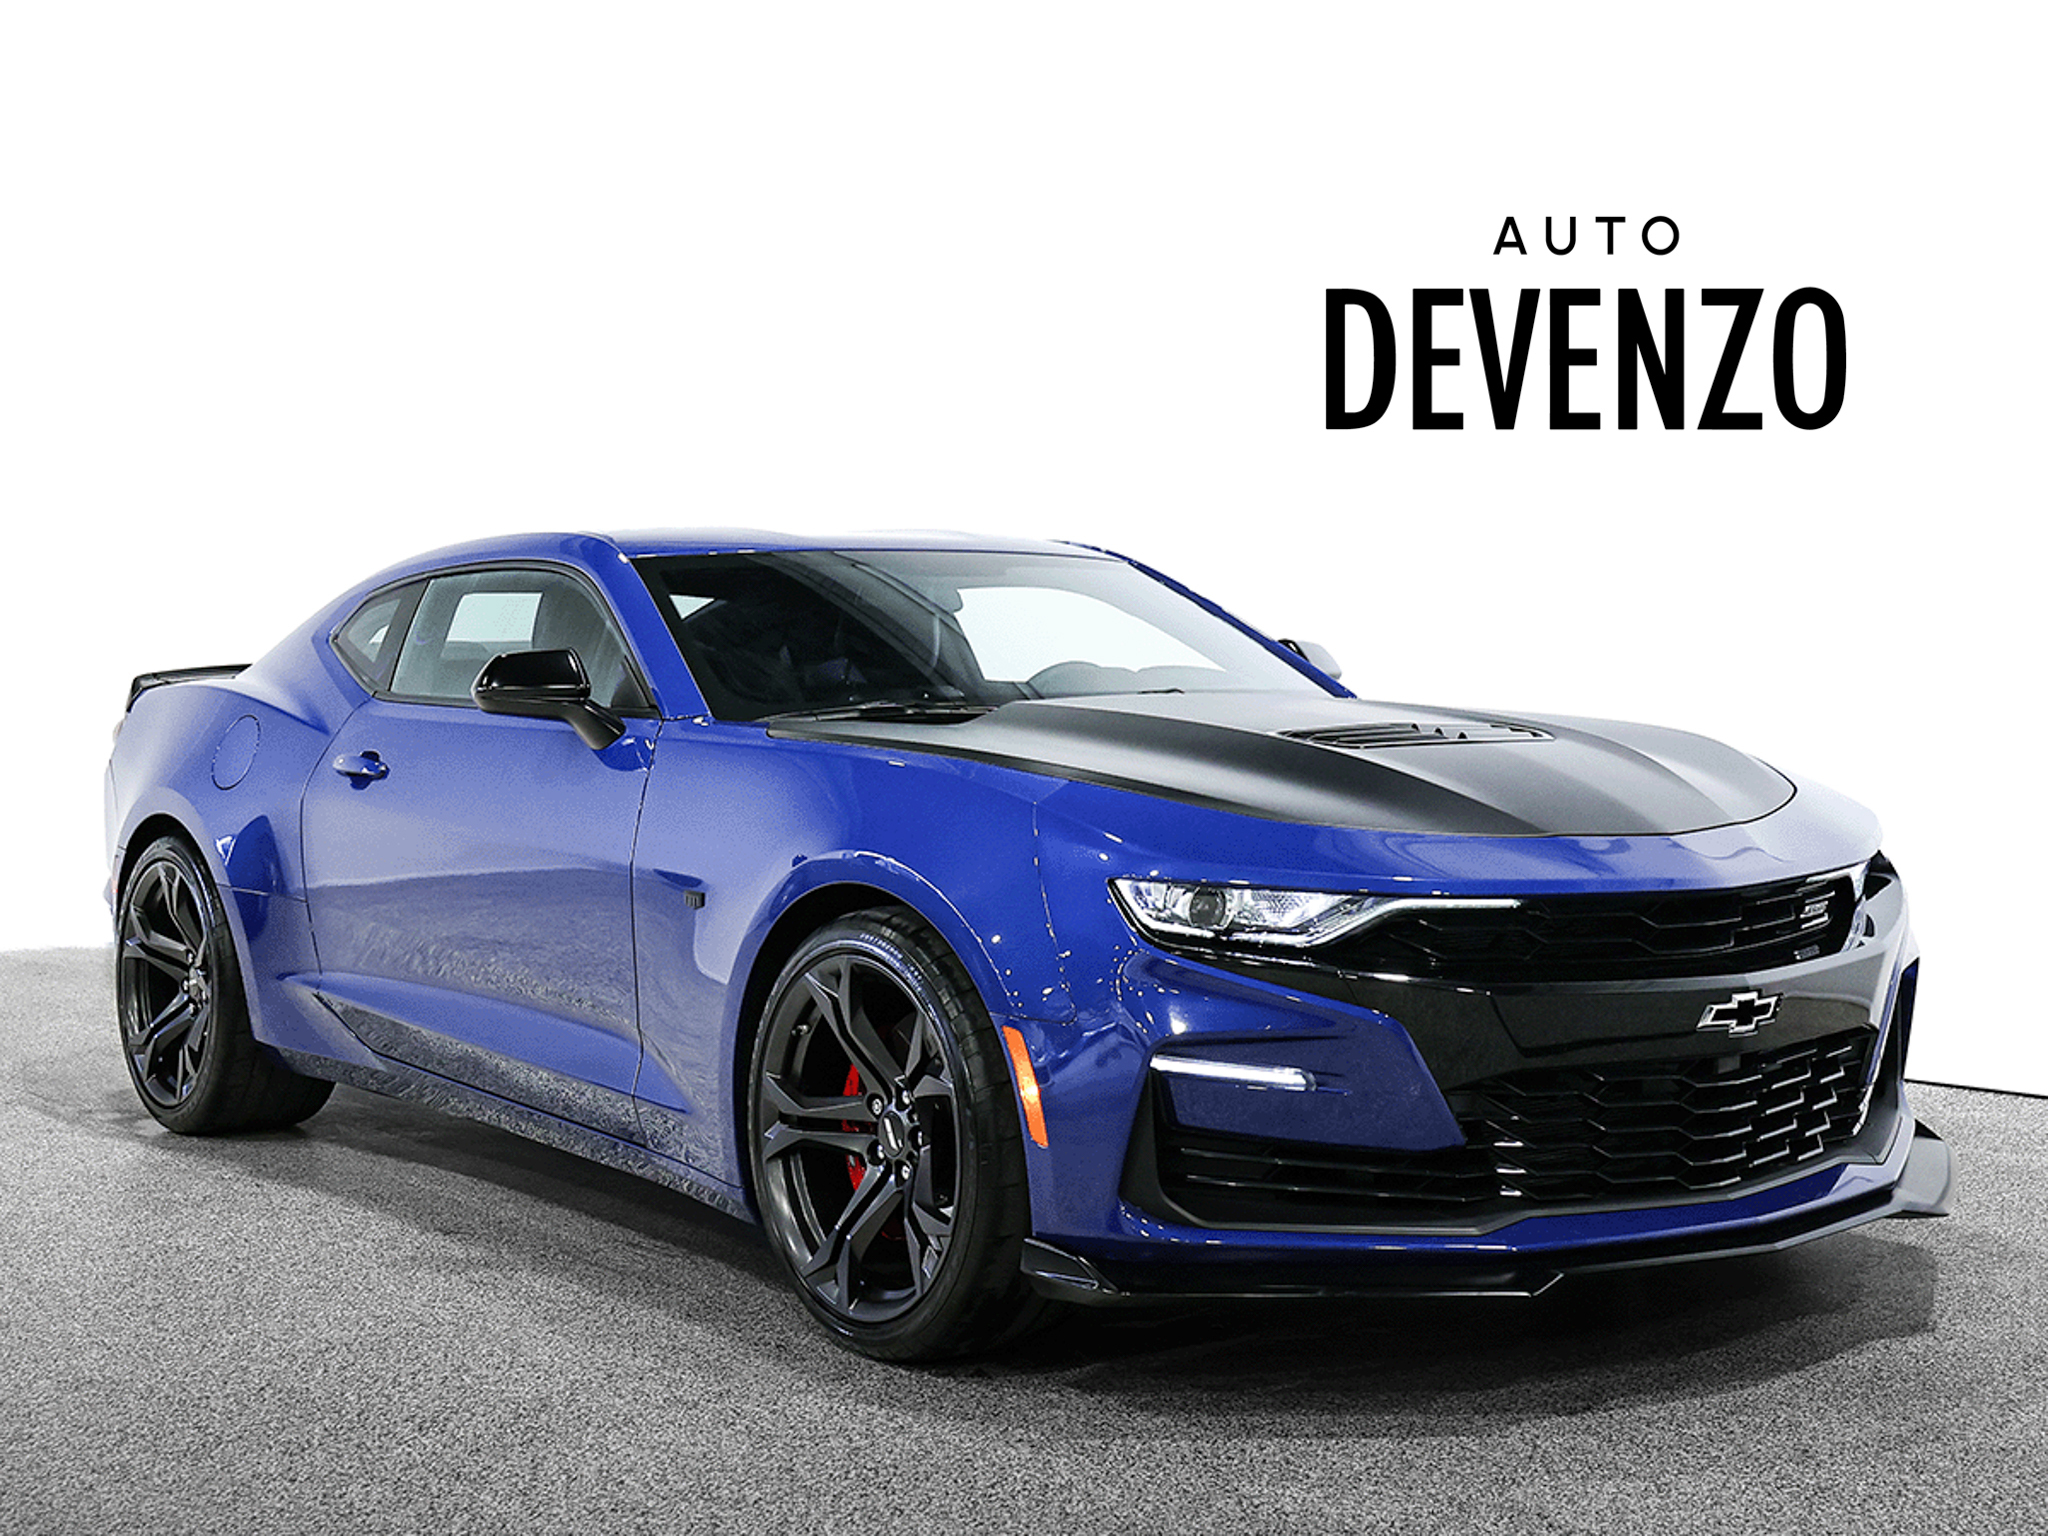 2019 Chevrolet Camaro 1SS Manual 6 spd 1LE Track Performance Package